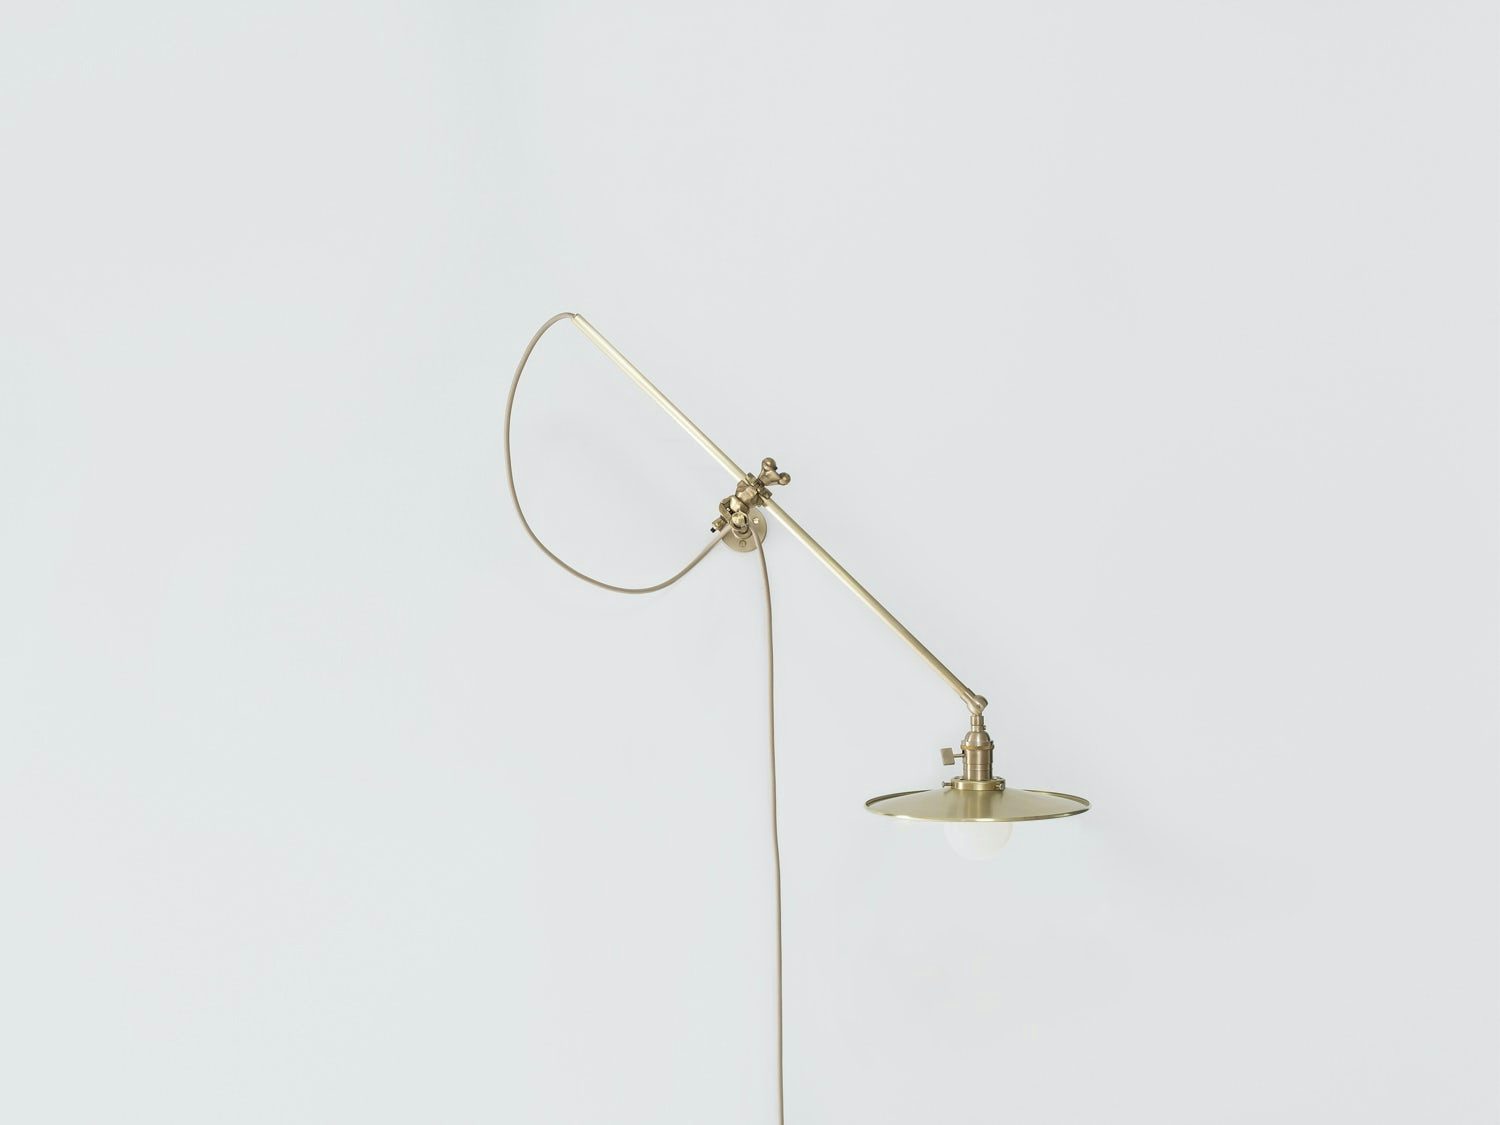 gallery image for Brass-Wall-Lamp_Down